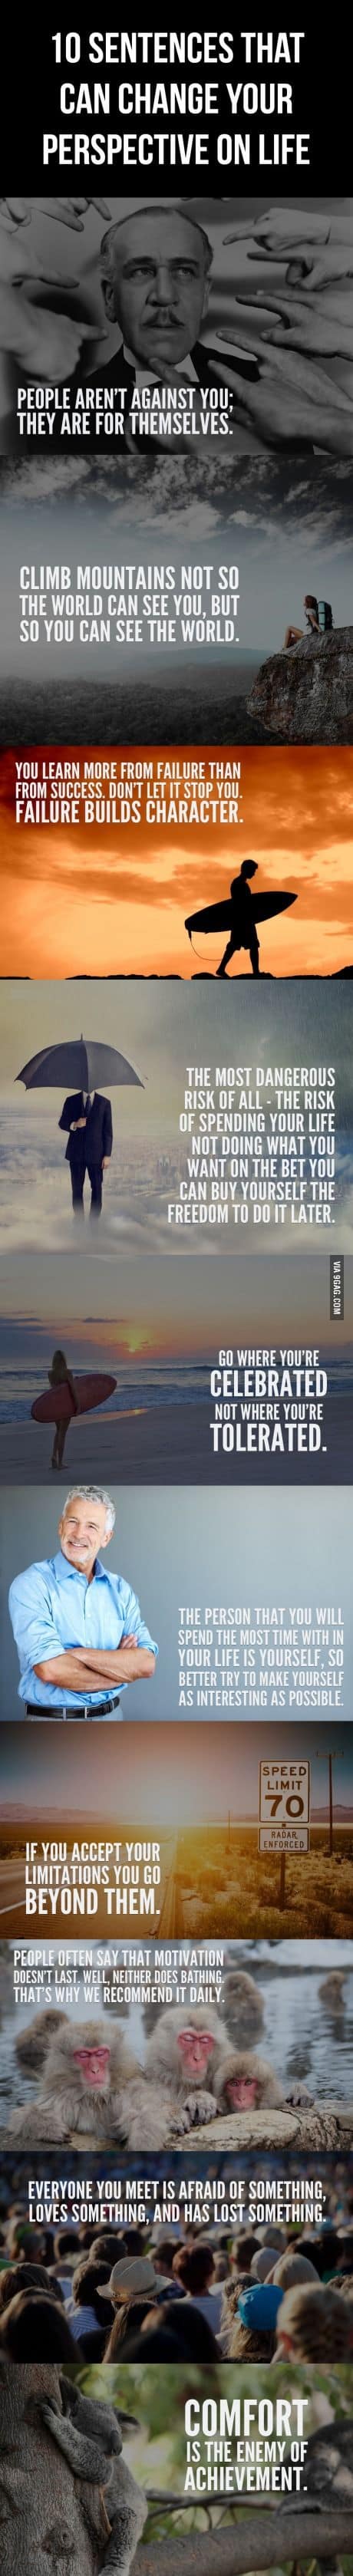 10 sentences that can change your life